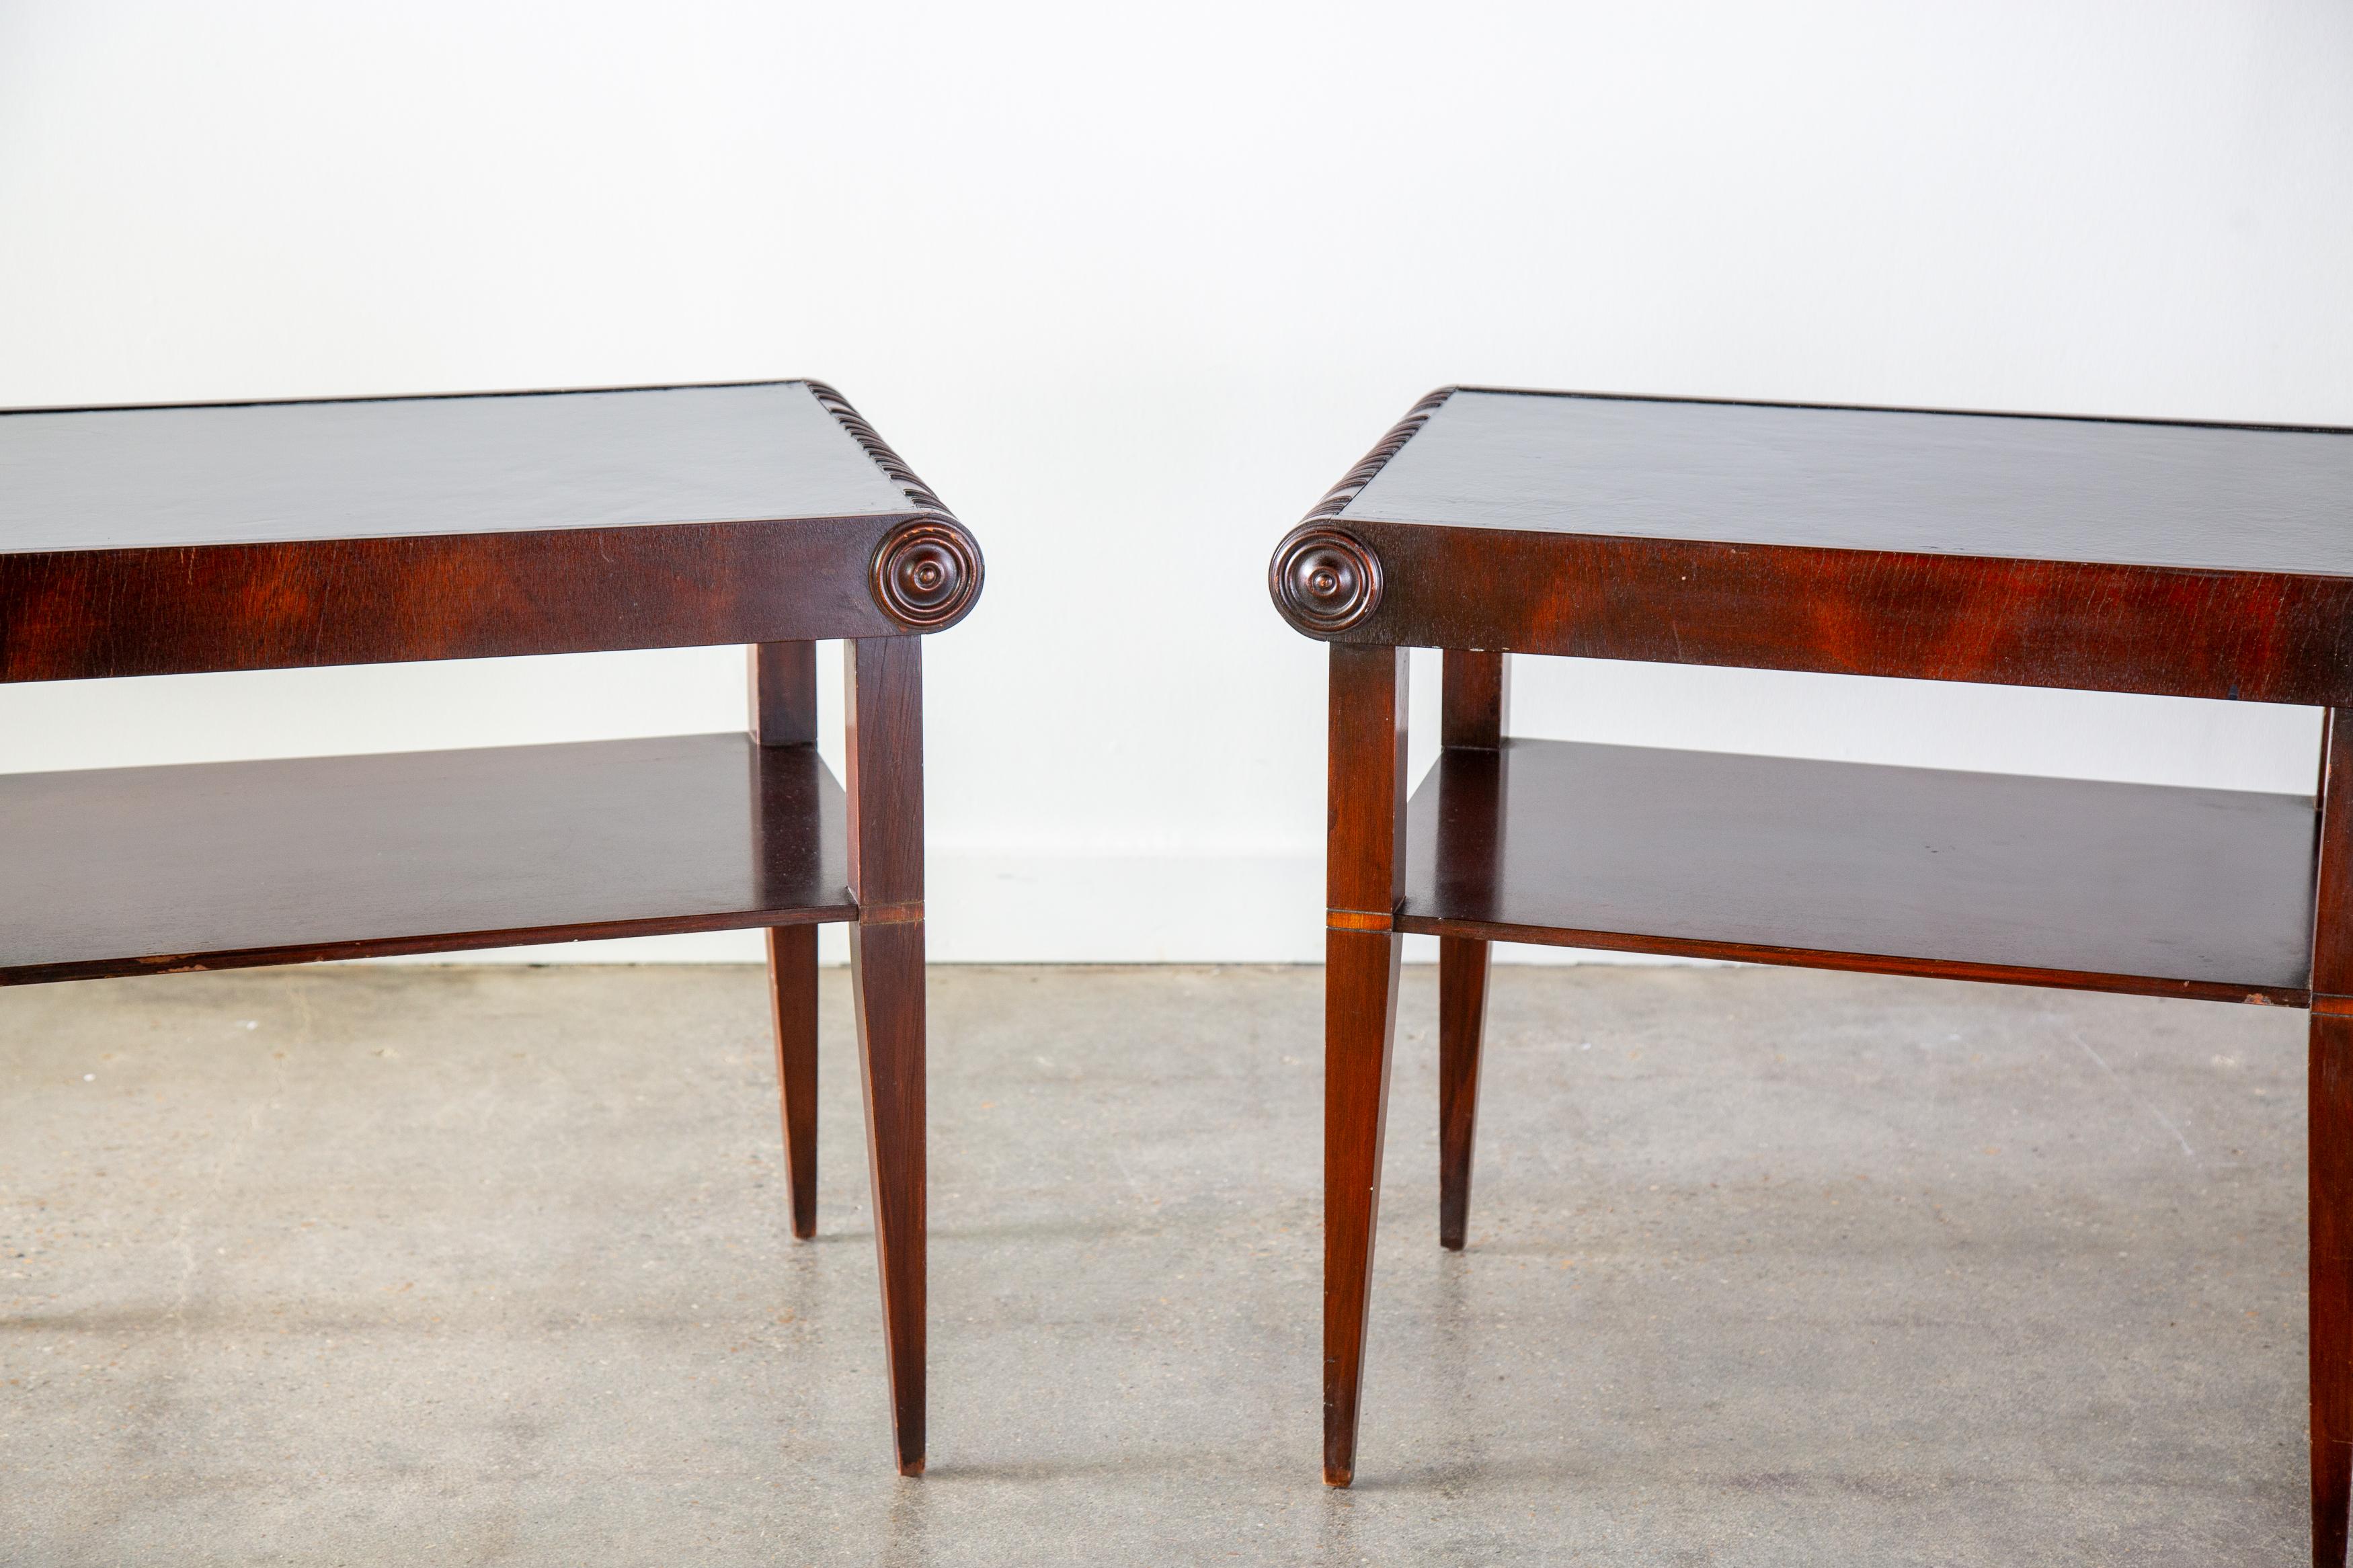 1920s Swedish Art Deco Leather top Mahogany End Tables Nightstands For Sale 6